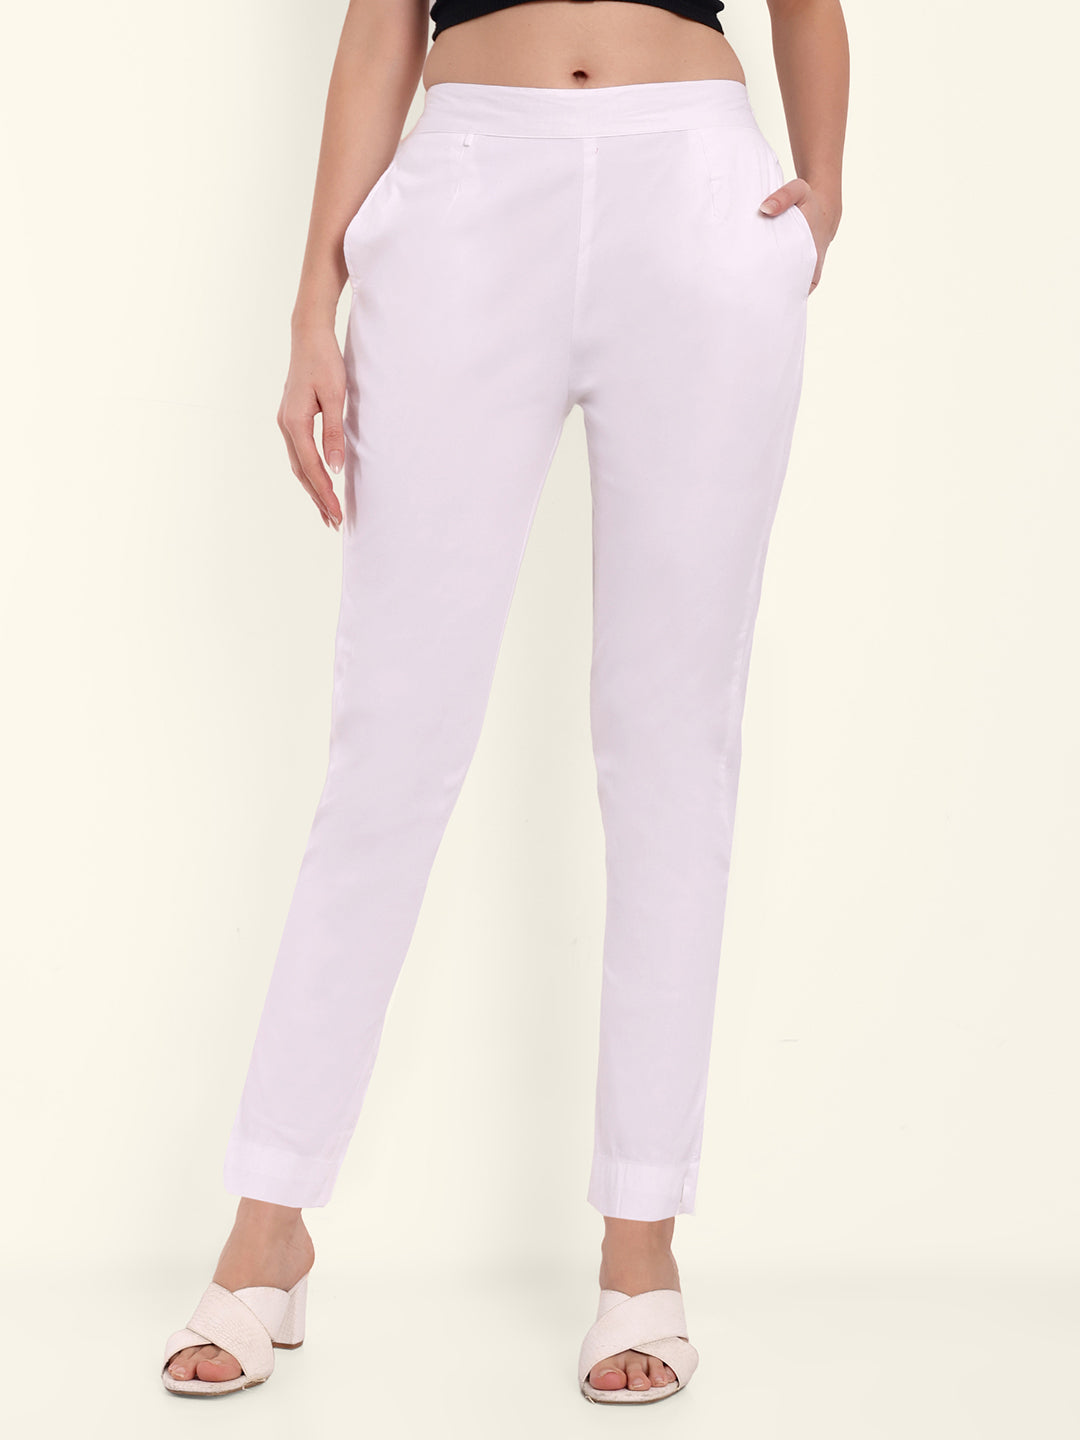 Buy White Trousers & Pants for Women by RIVI Online | Ajio.com